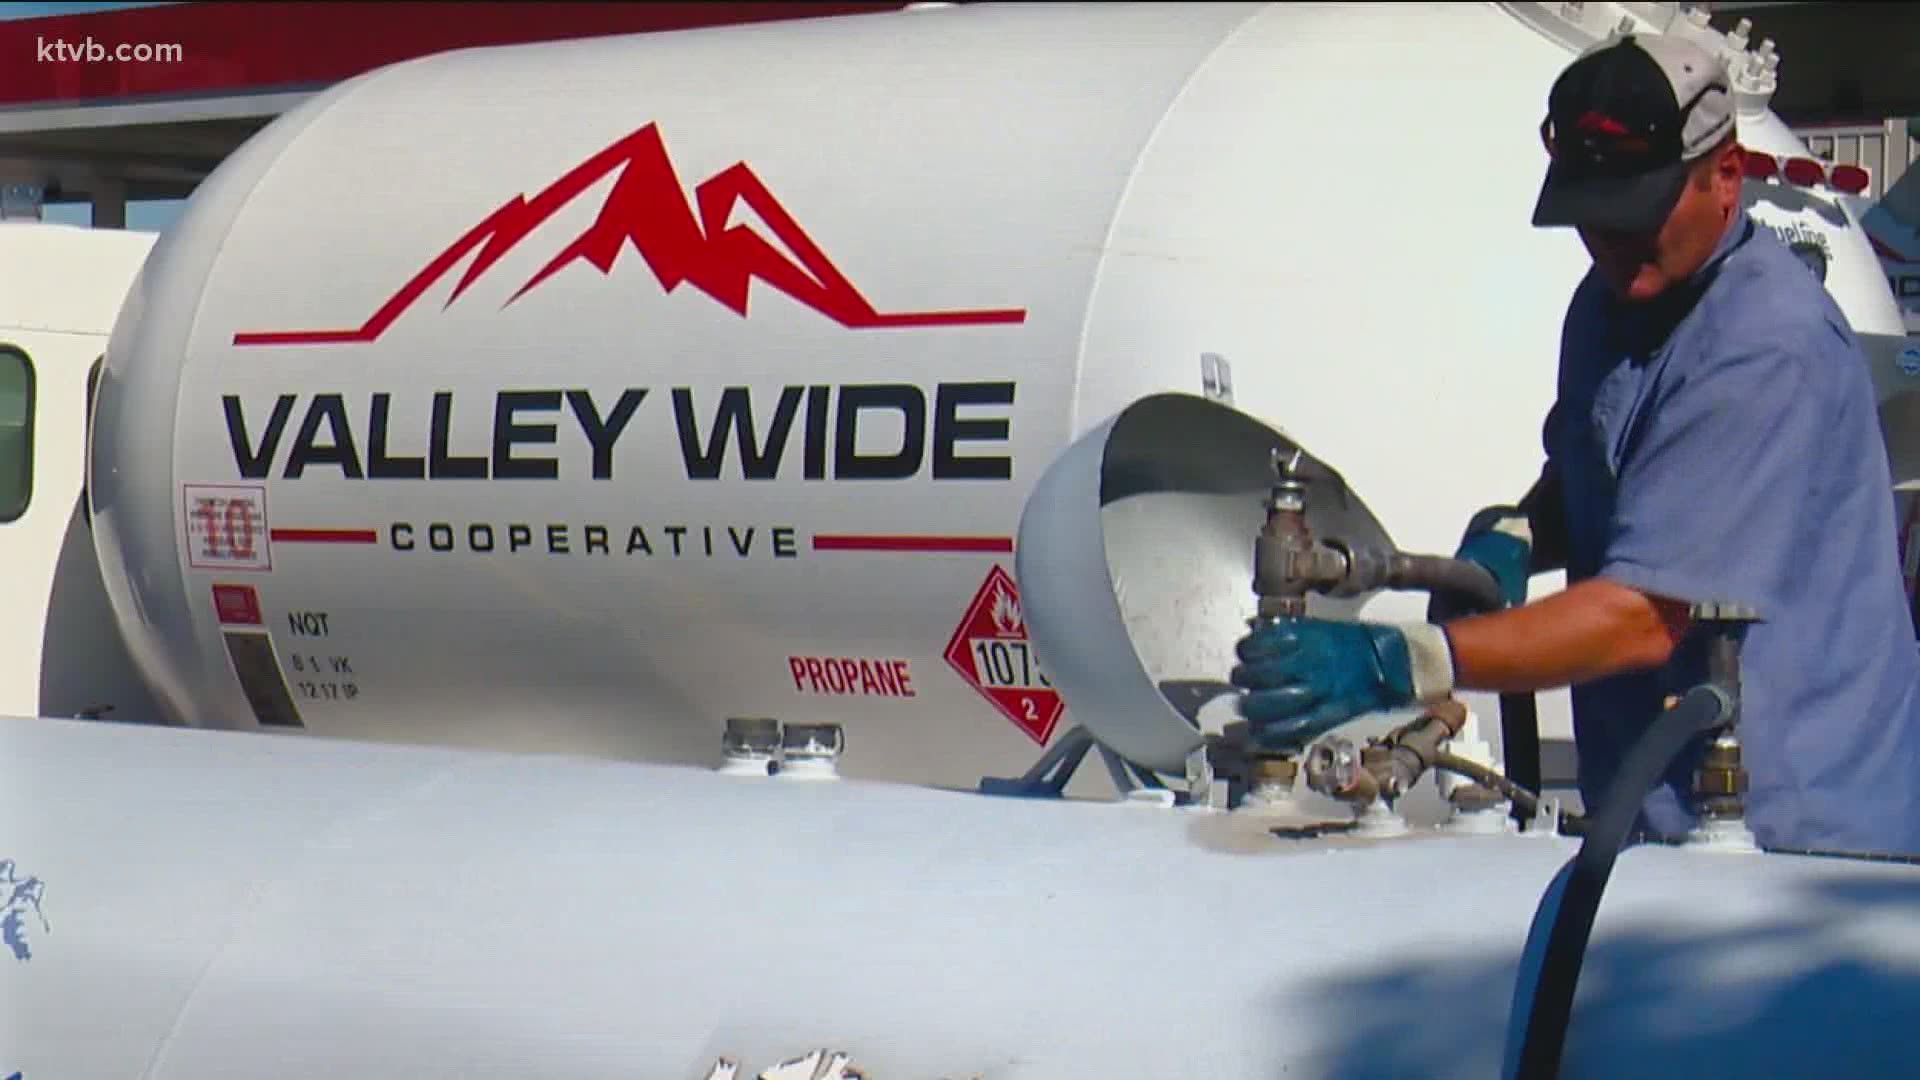 With the annual 7 Cares Idaho Shares fundraiser underway, Valley Wide Cooperative is pitching in to help out.